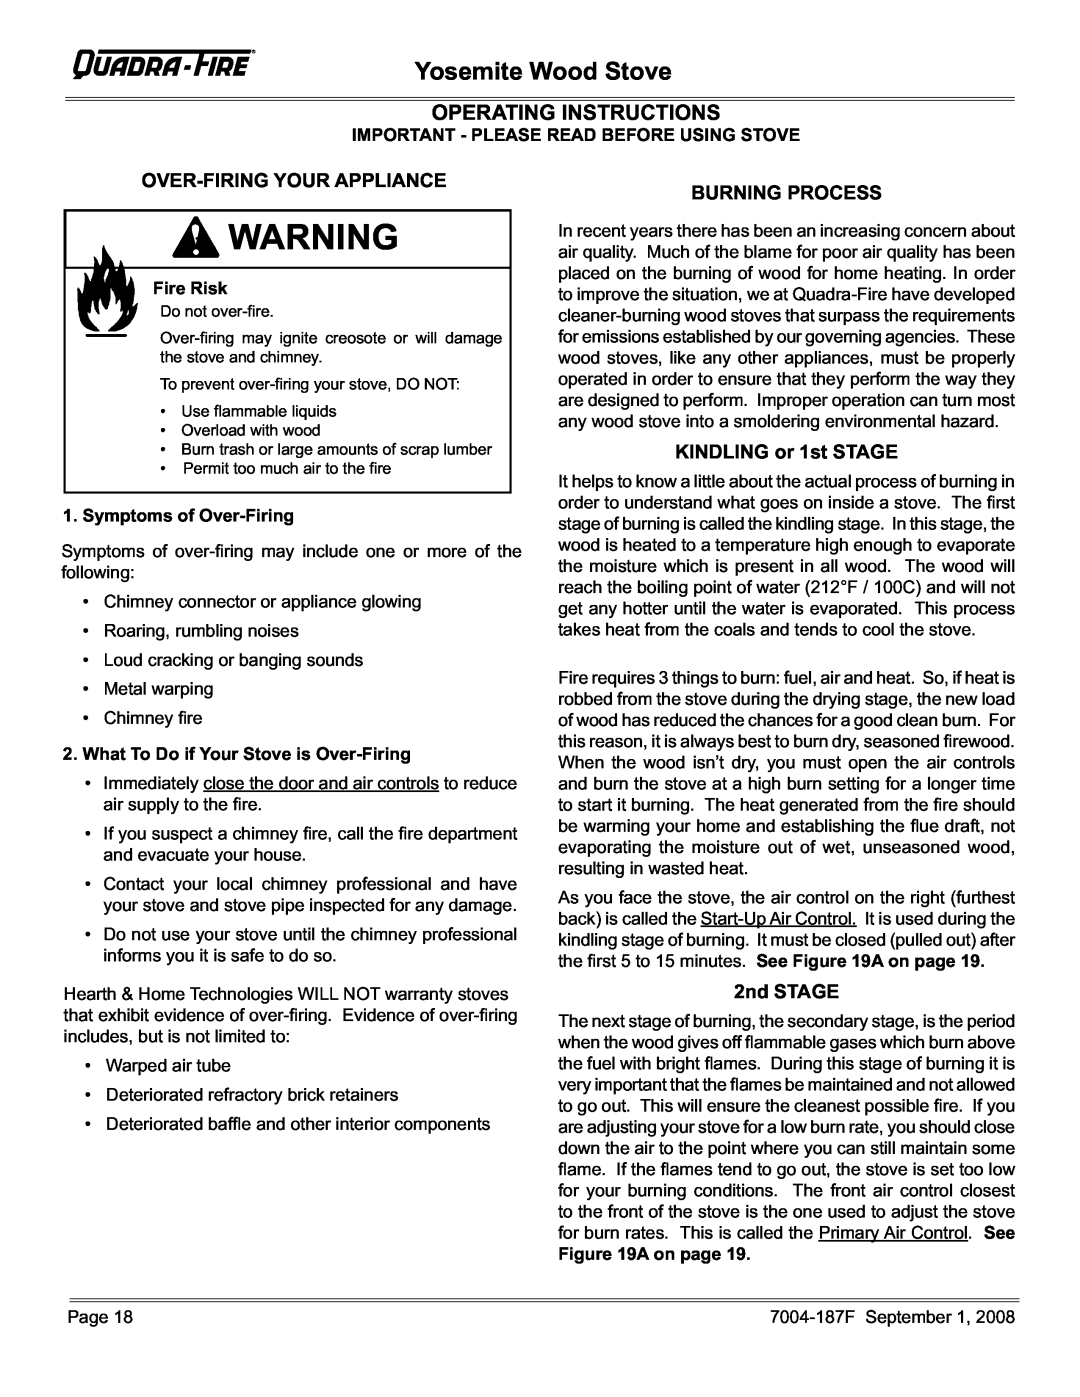 Hearth and Home Technologies PMH Operating Instructions, Yosemite Wood Stove, Important - Please Read Before Using Stove 